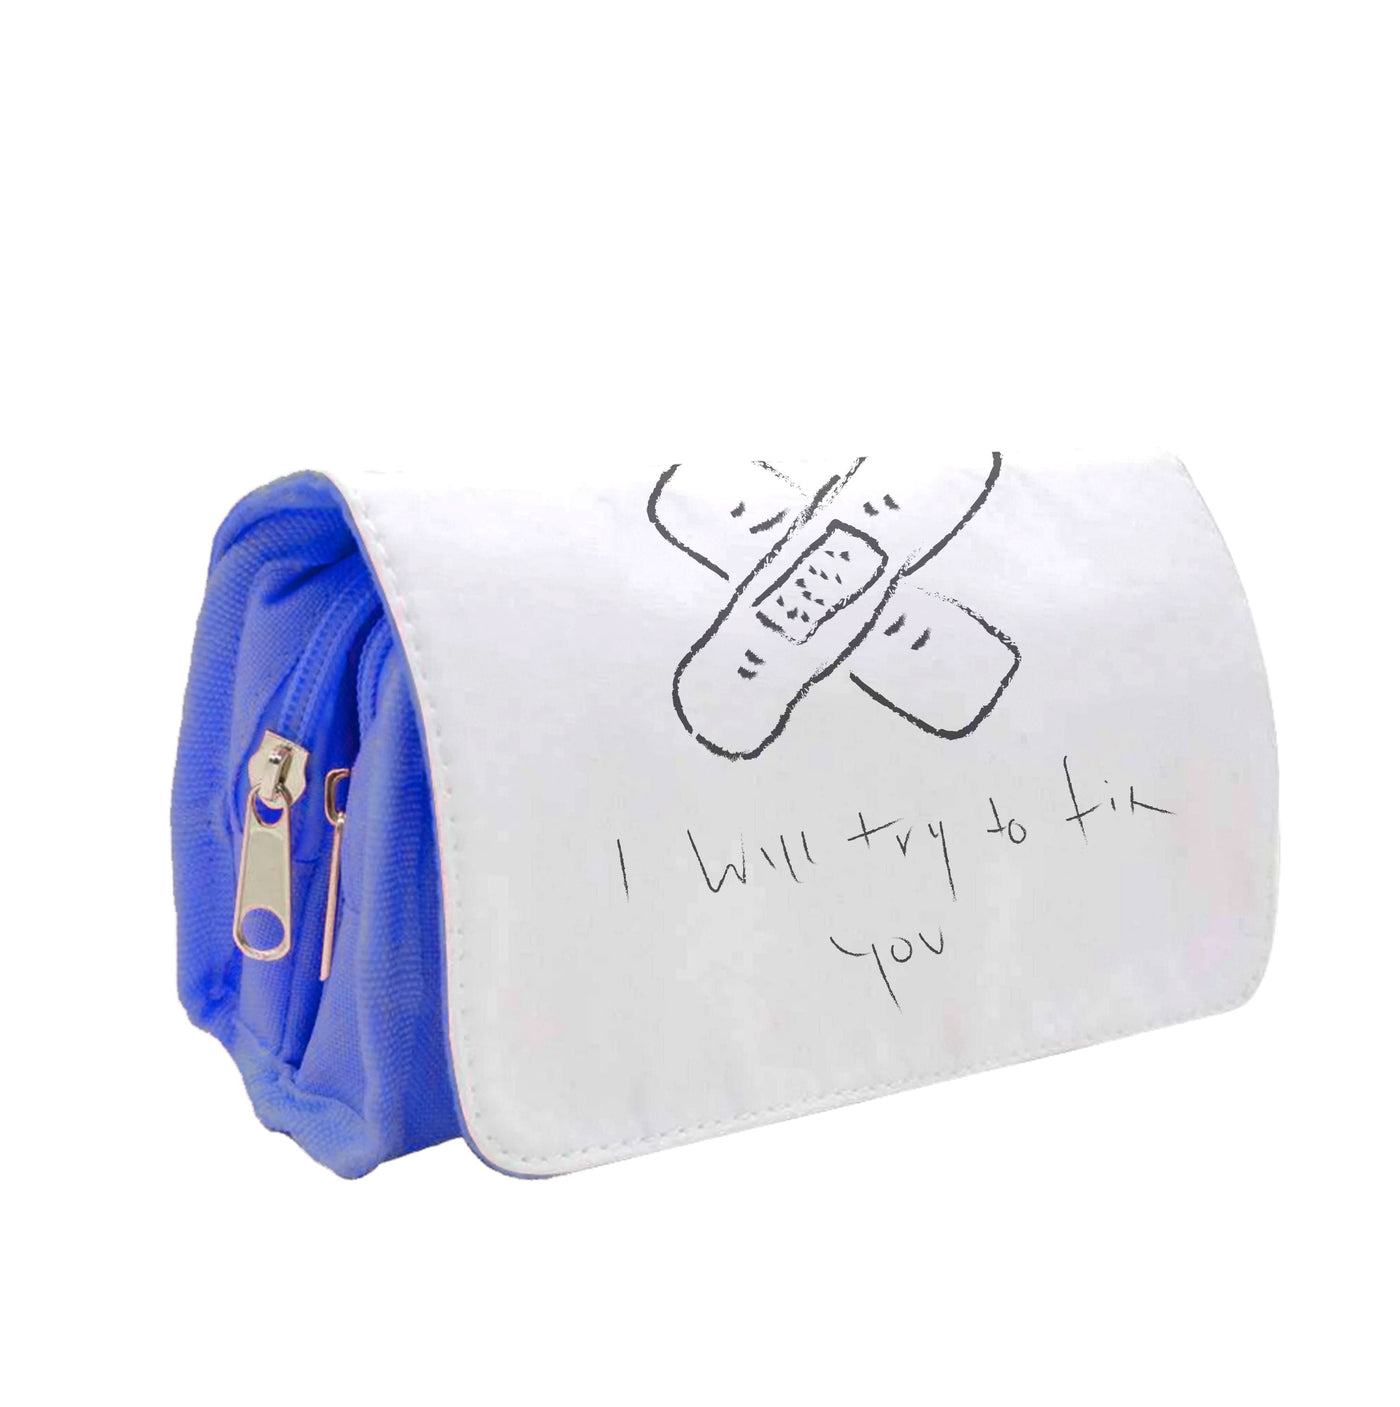 I Will Try To Fix You - White Coldplay Pencil Case